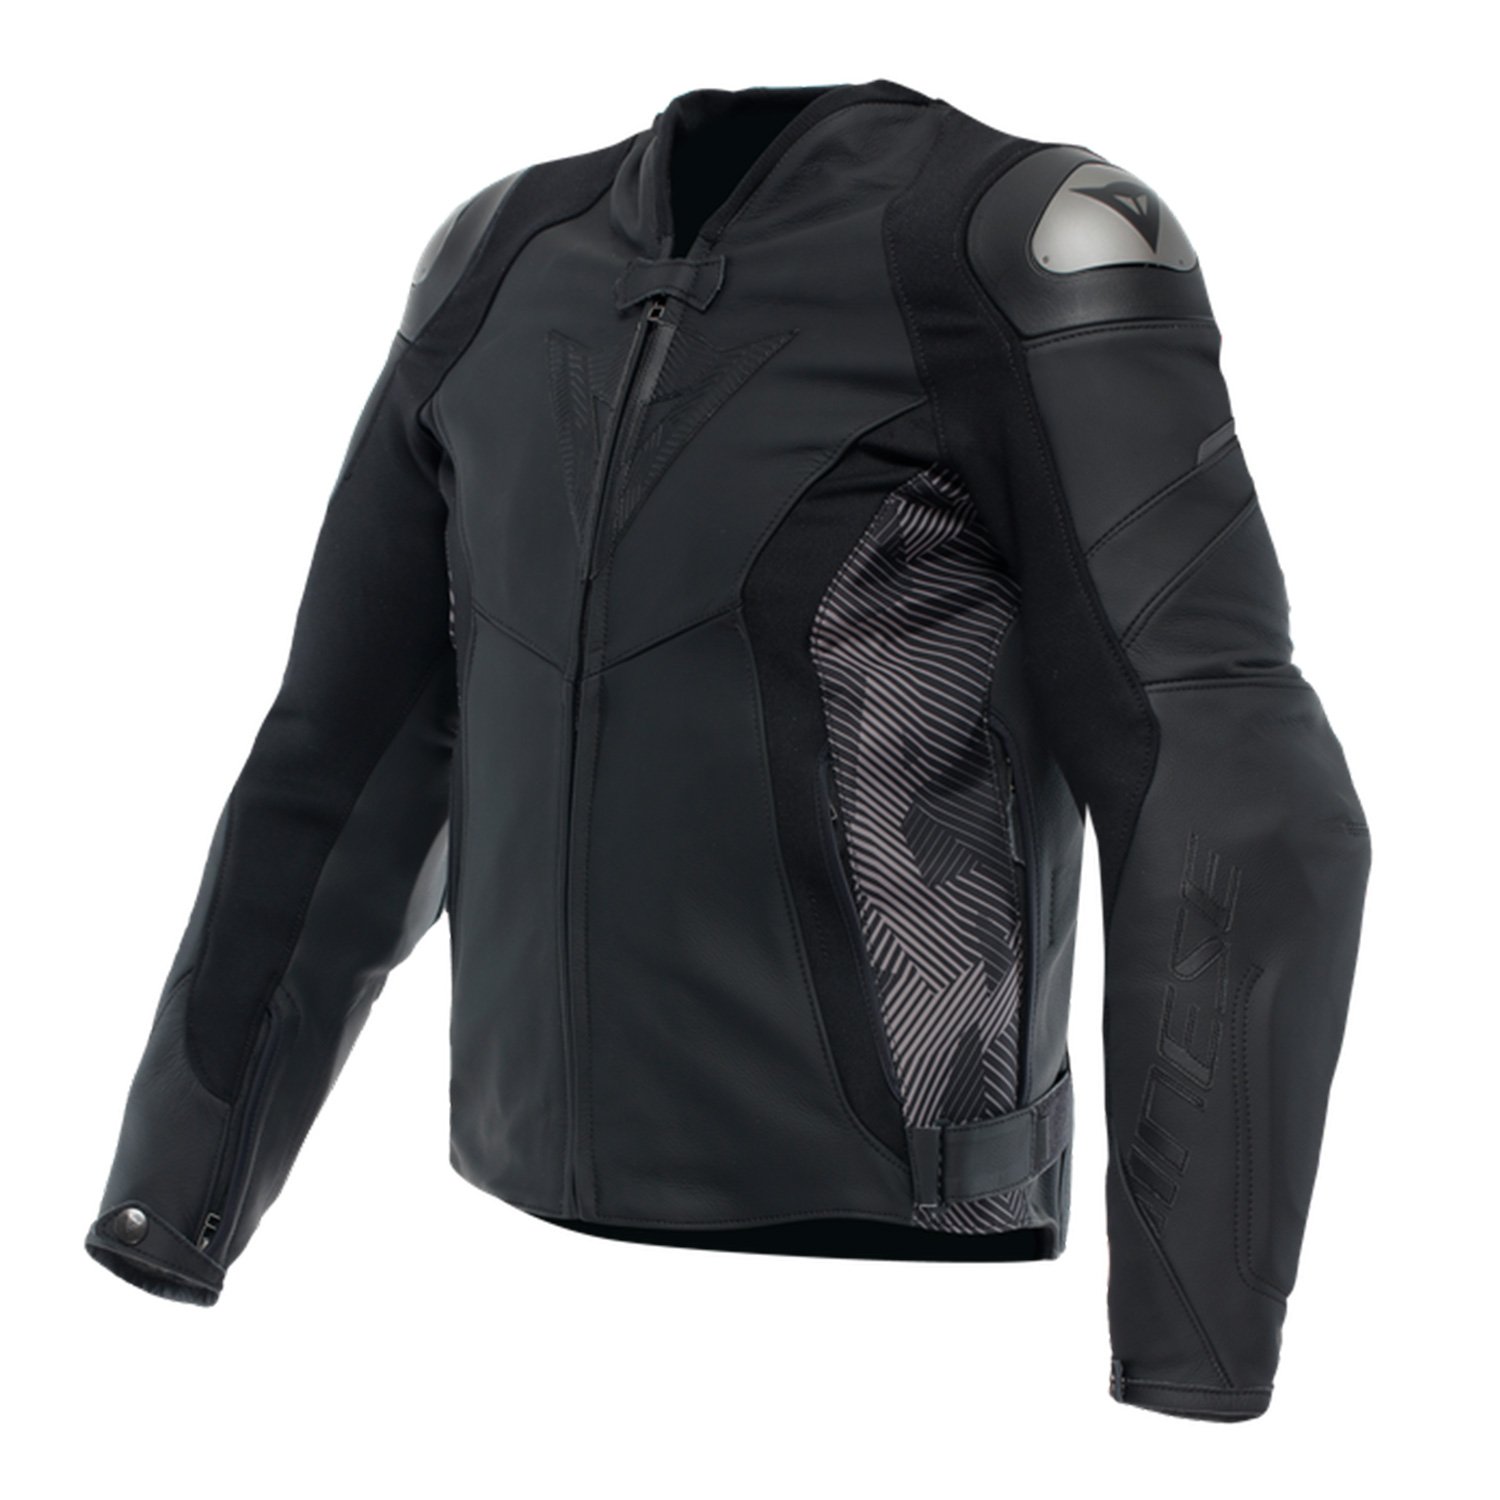 Image of Dainese Avro Leather 5 Jacket Black Anthracite Talla 52